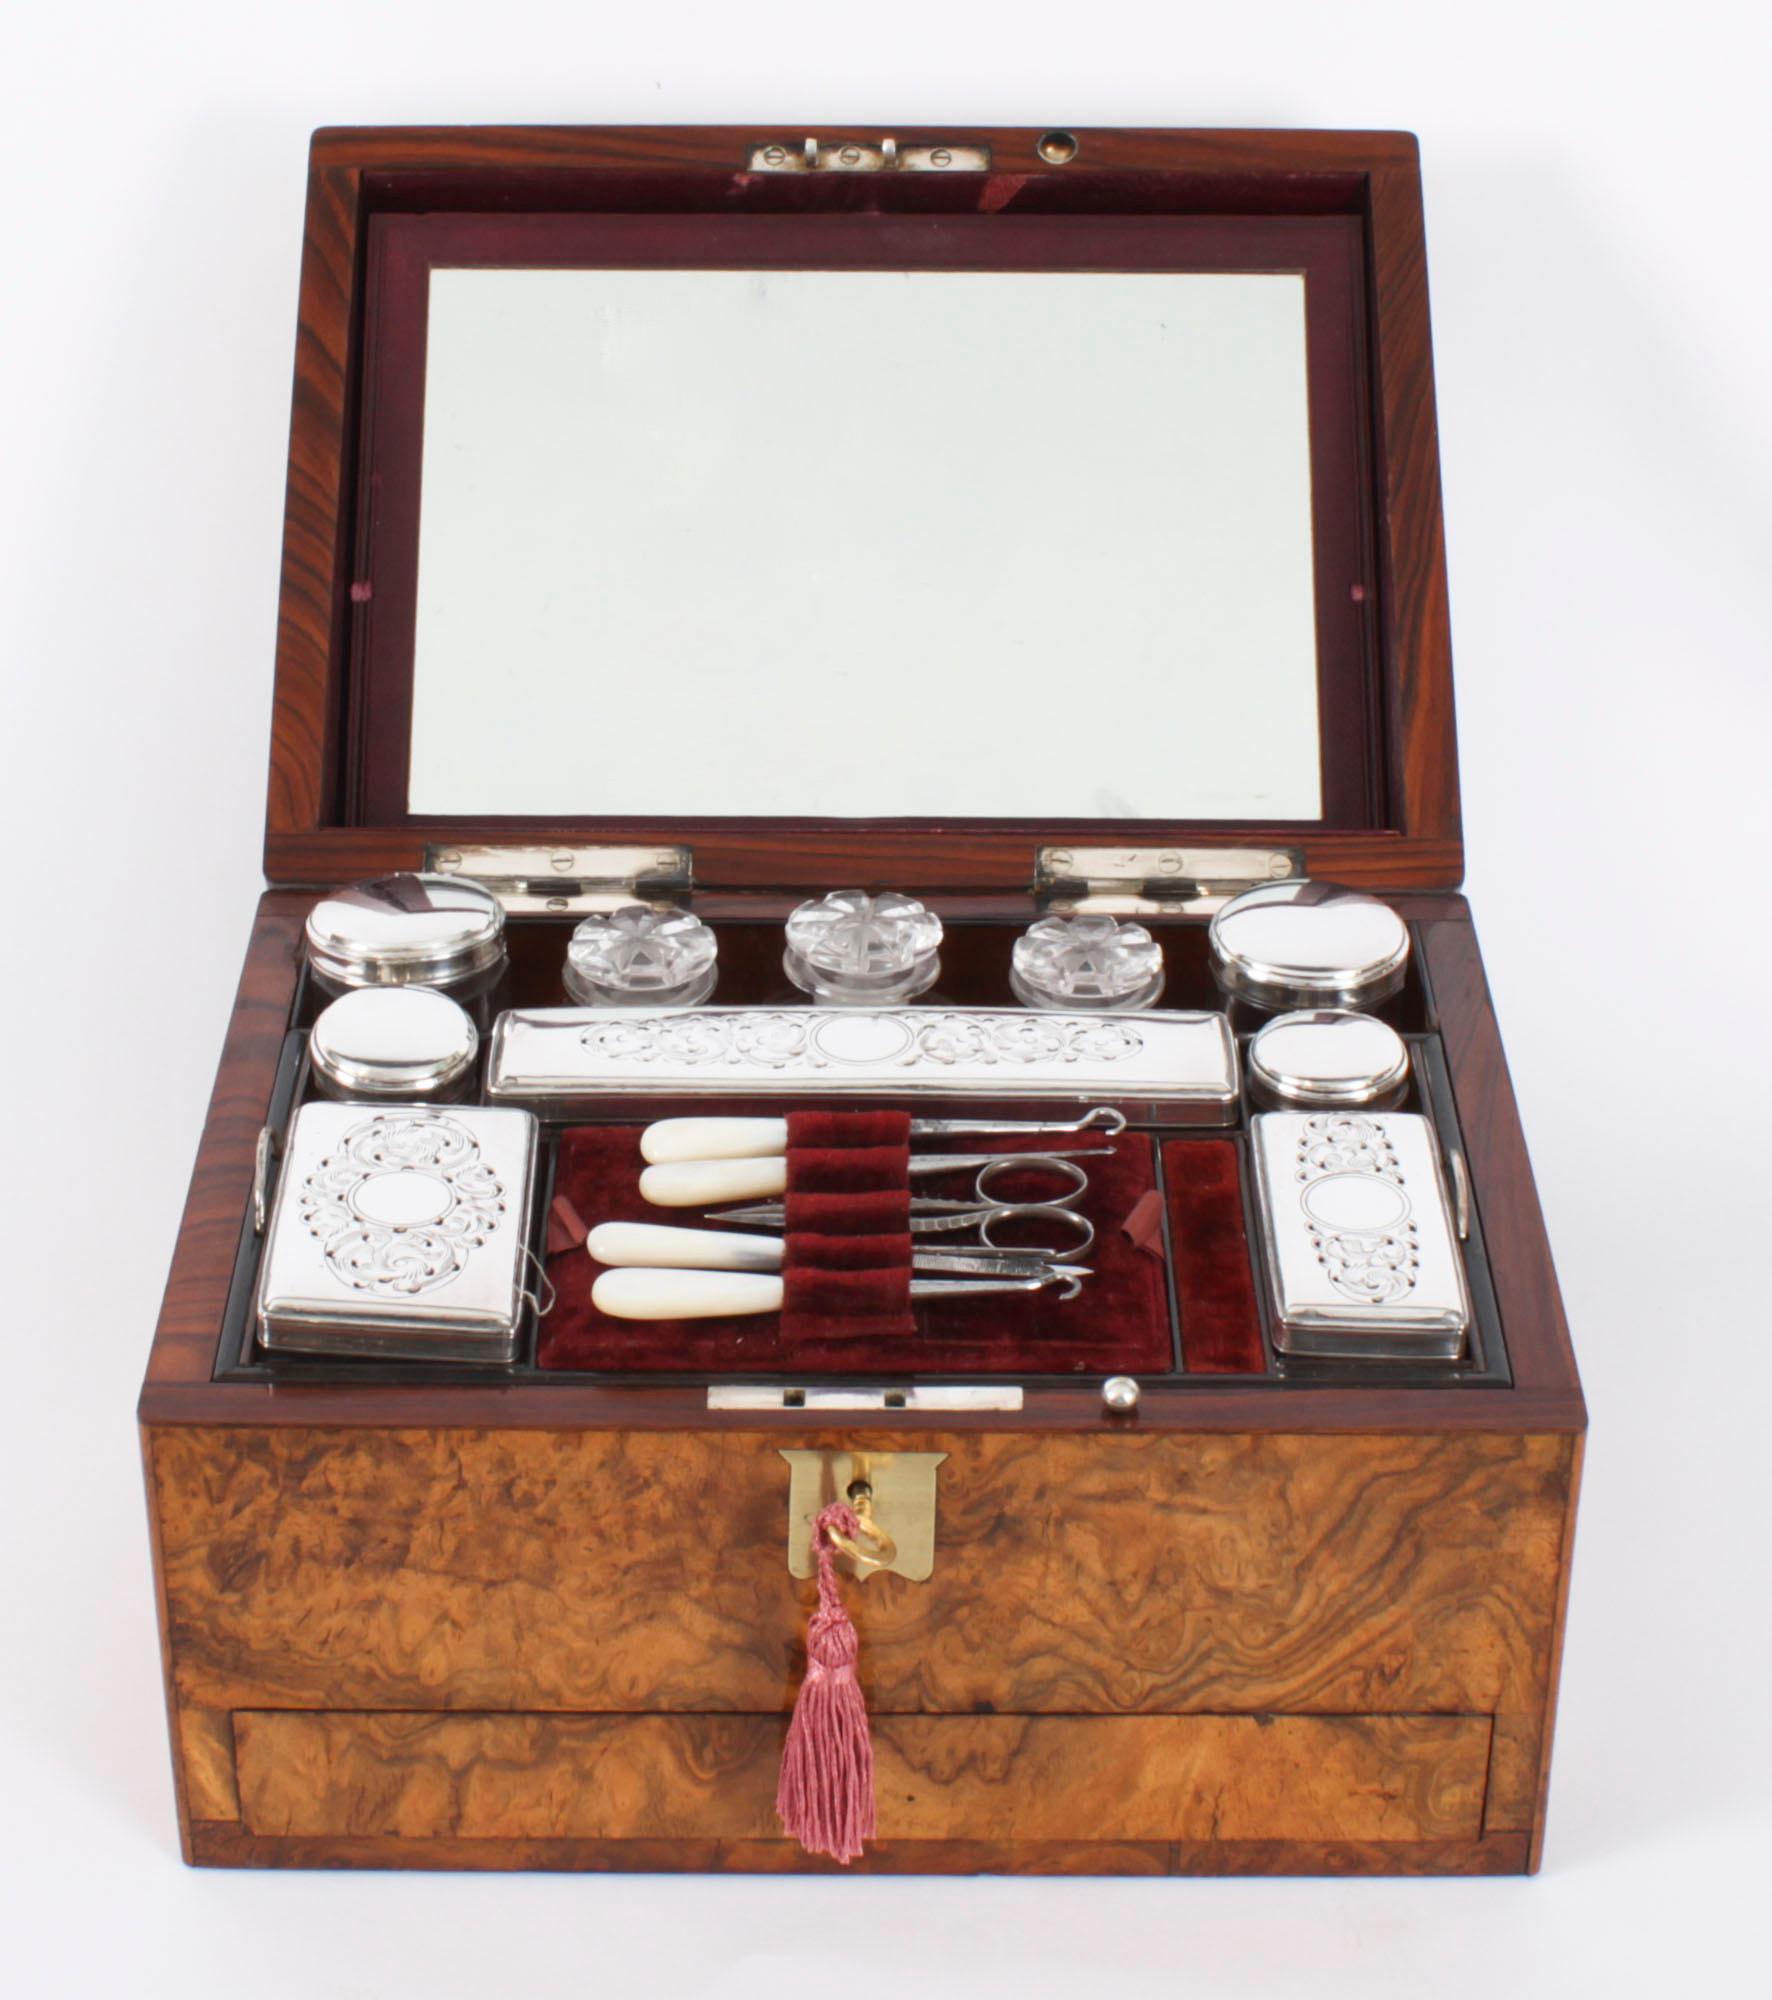 This is a magnificent antique Victorian Burr Walnut table top Vanity Box, circa 1860 in date.

The fitted interior reveals a lift-out tray, fitted with silver-plate mounted cut glass bottles, boxes, and jars, all finely engraved and pierced, the